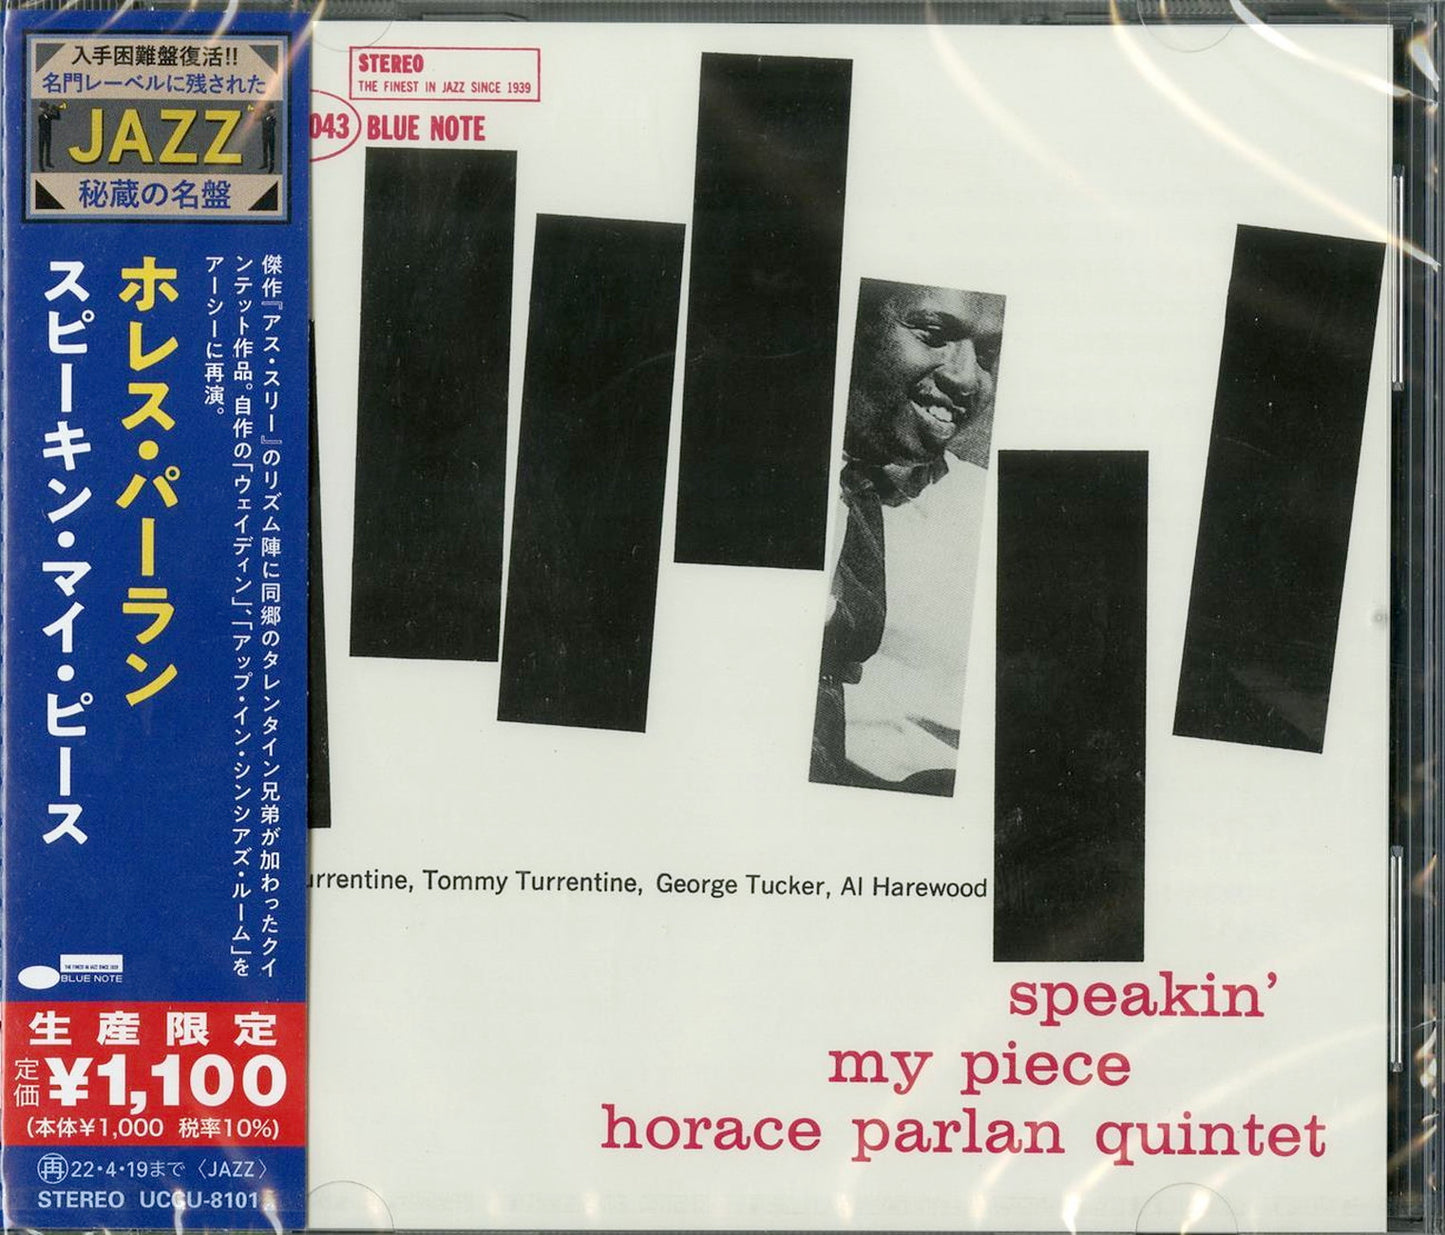 Horace Parlan - Speakin' My Piece - Japan  CD Limited Edition